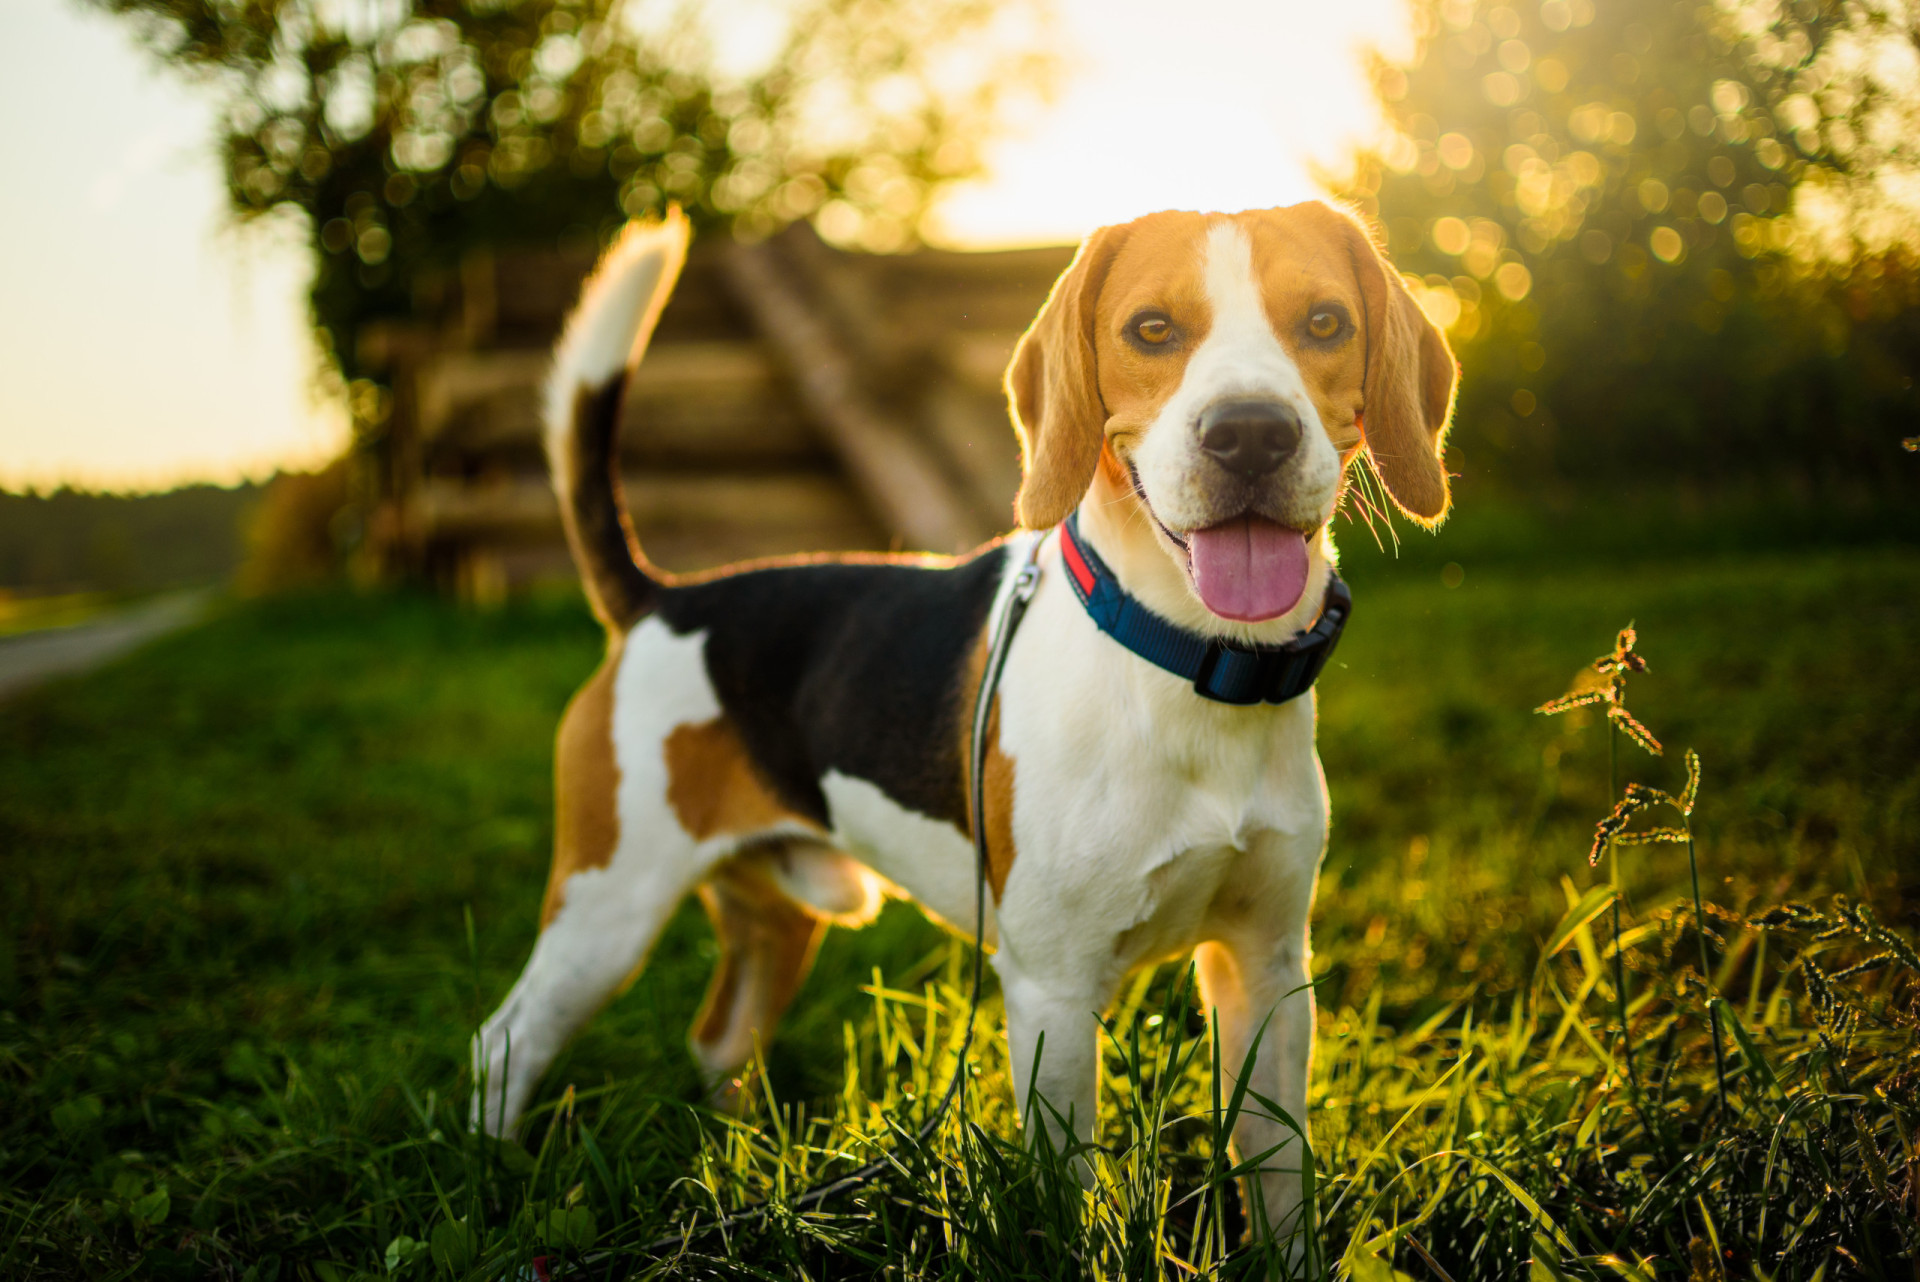 <p>A traditional hunting dog, this friendly pup has melted the hearts of many. Beagles live for an average of 13 to 15 years. </p><p><a href="https://www.msn.com/en-us/community/channel/vid-7xx8mnucu55yw63we9va2gwr7uihbxwc68fxqp25x6tg4ftibpra?cvid=94631541bc0f4f89bfd59158d696ad7e">Follow us and access great exclusive content every day</a></p>